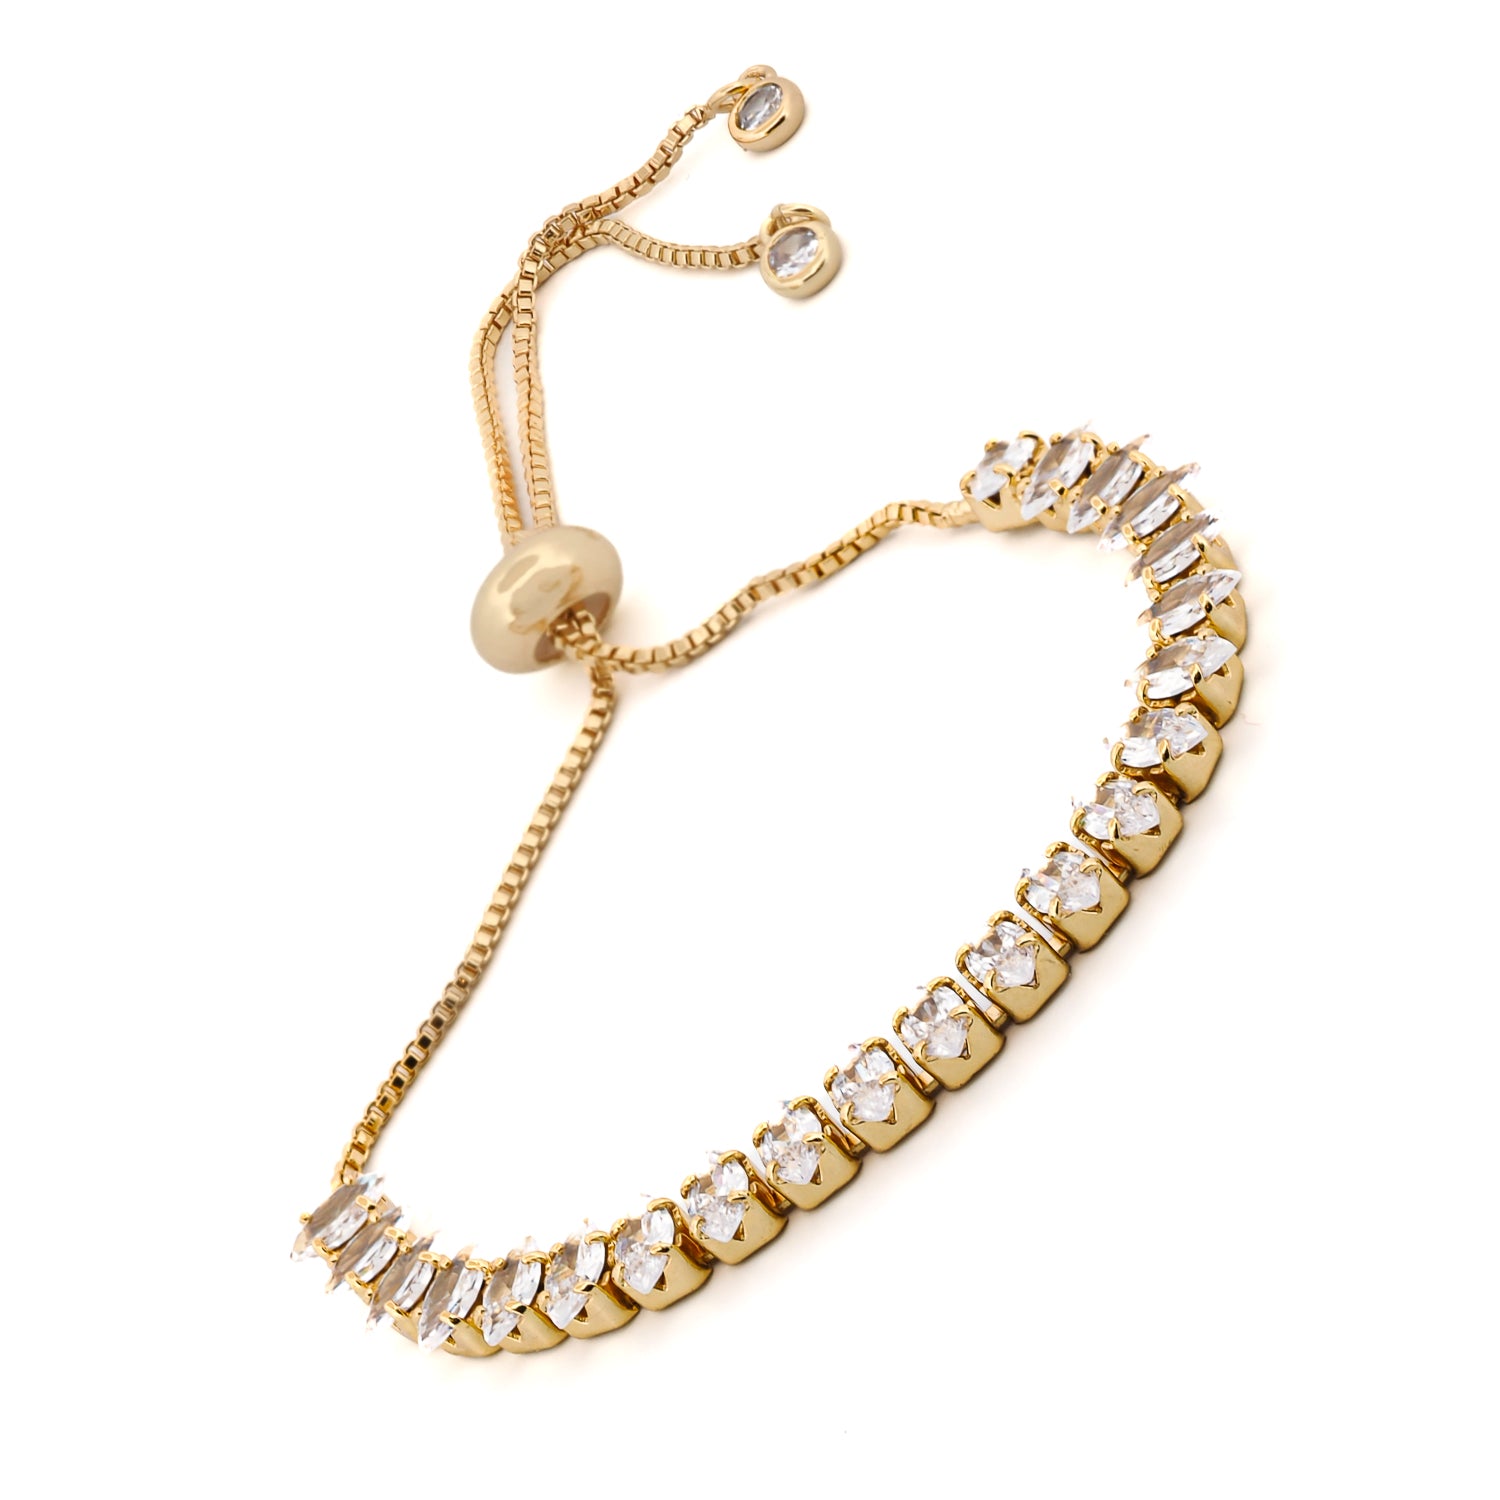 Shimmering Style: Gold and Diamond Fashion Accessory